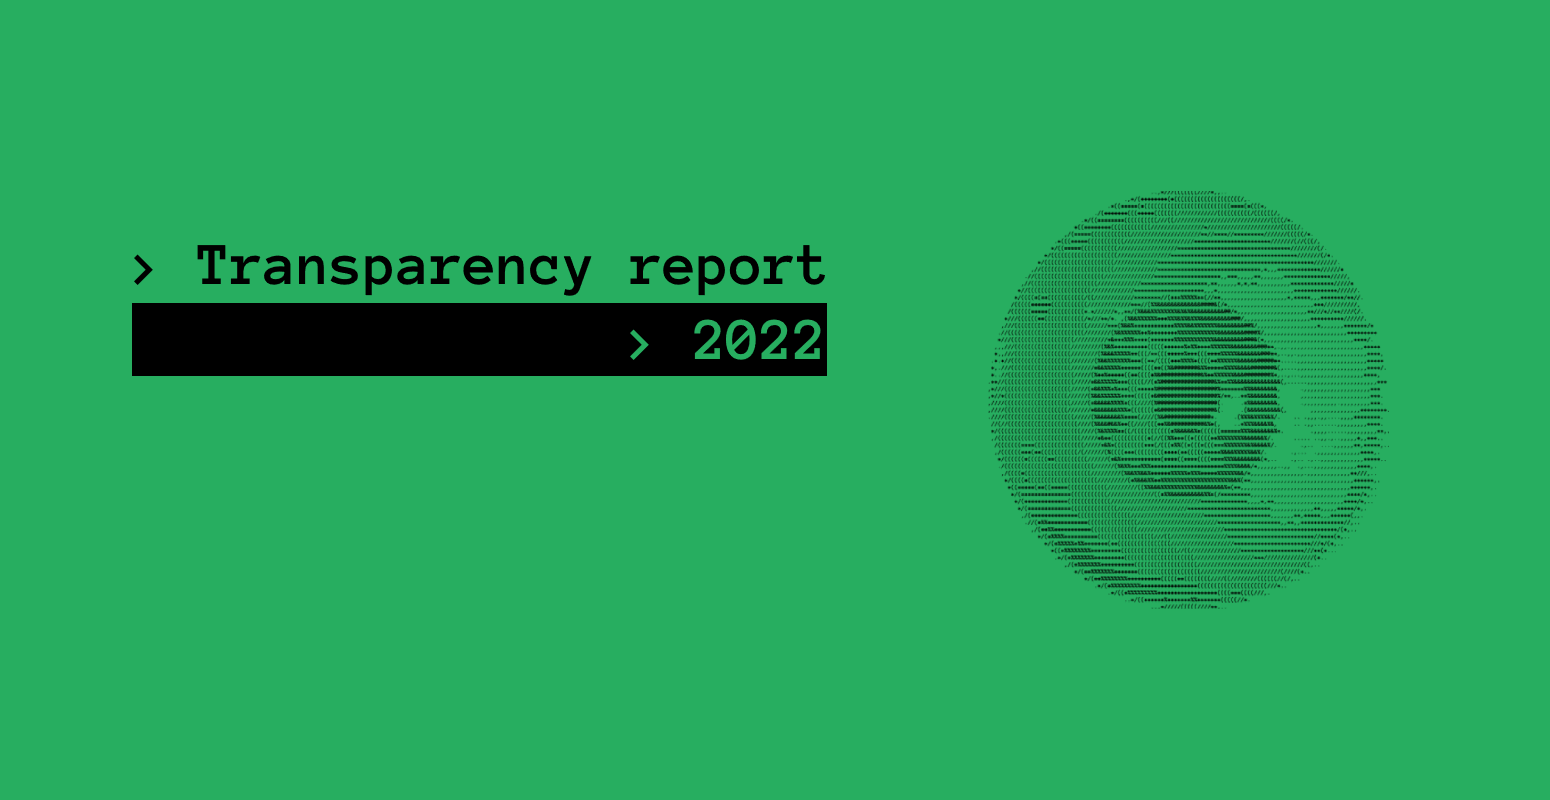 Transparency report for 2022